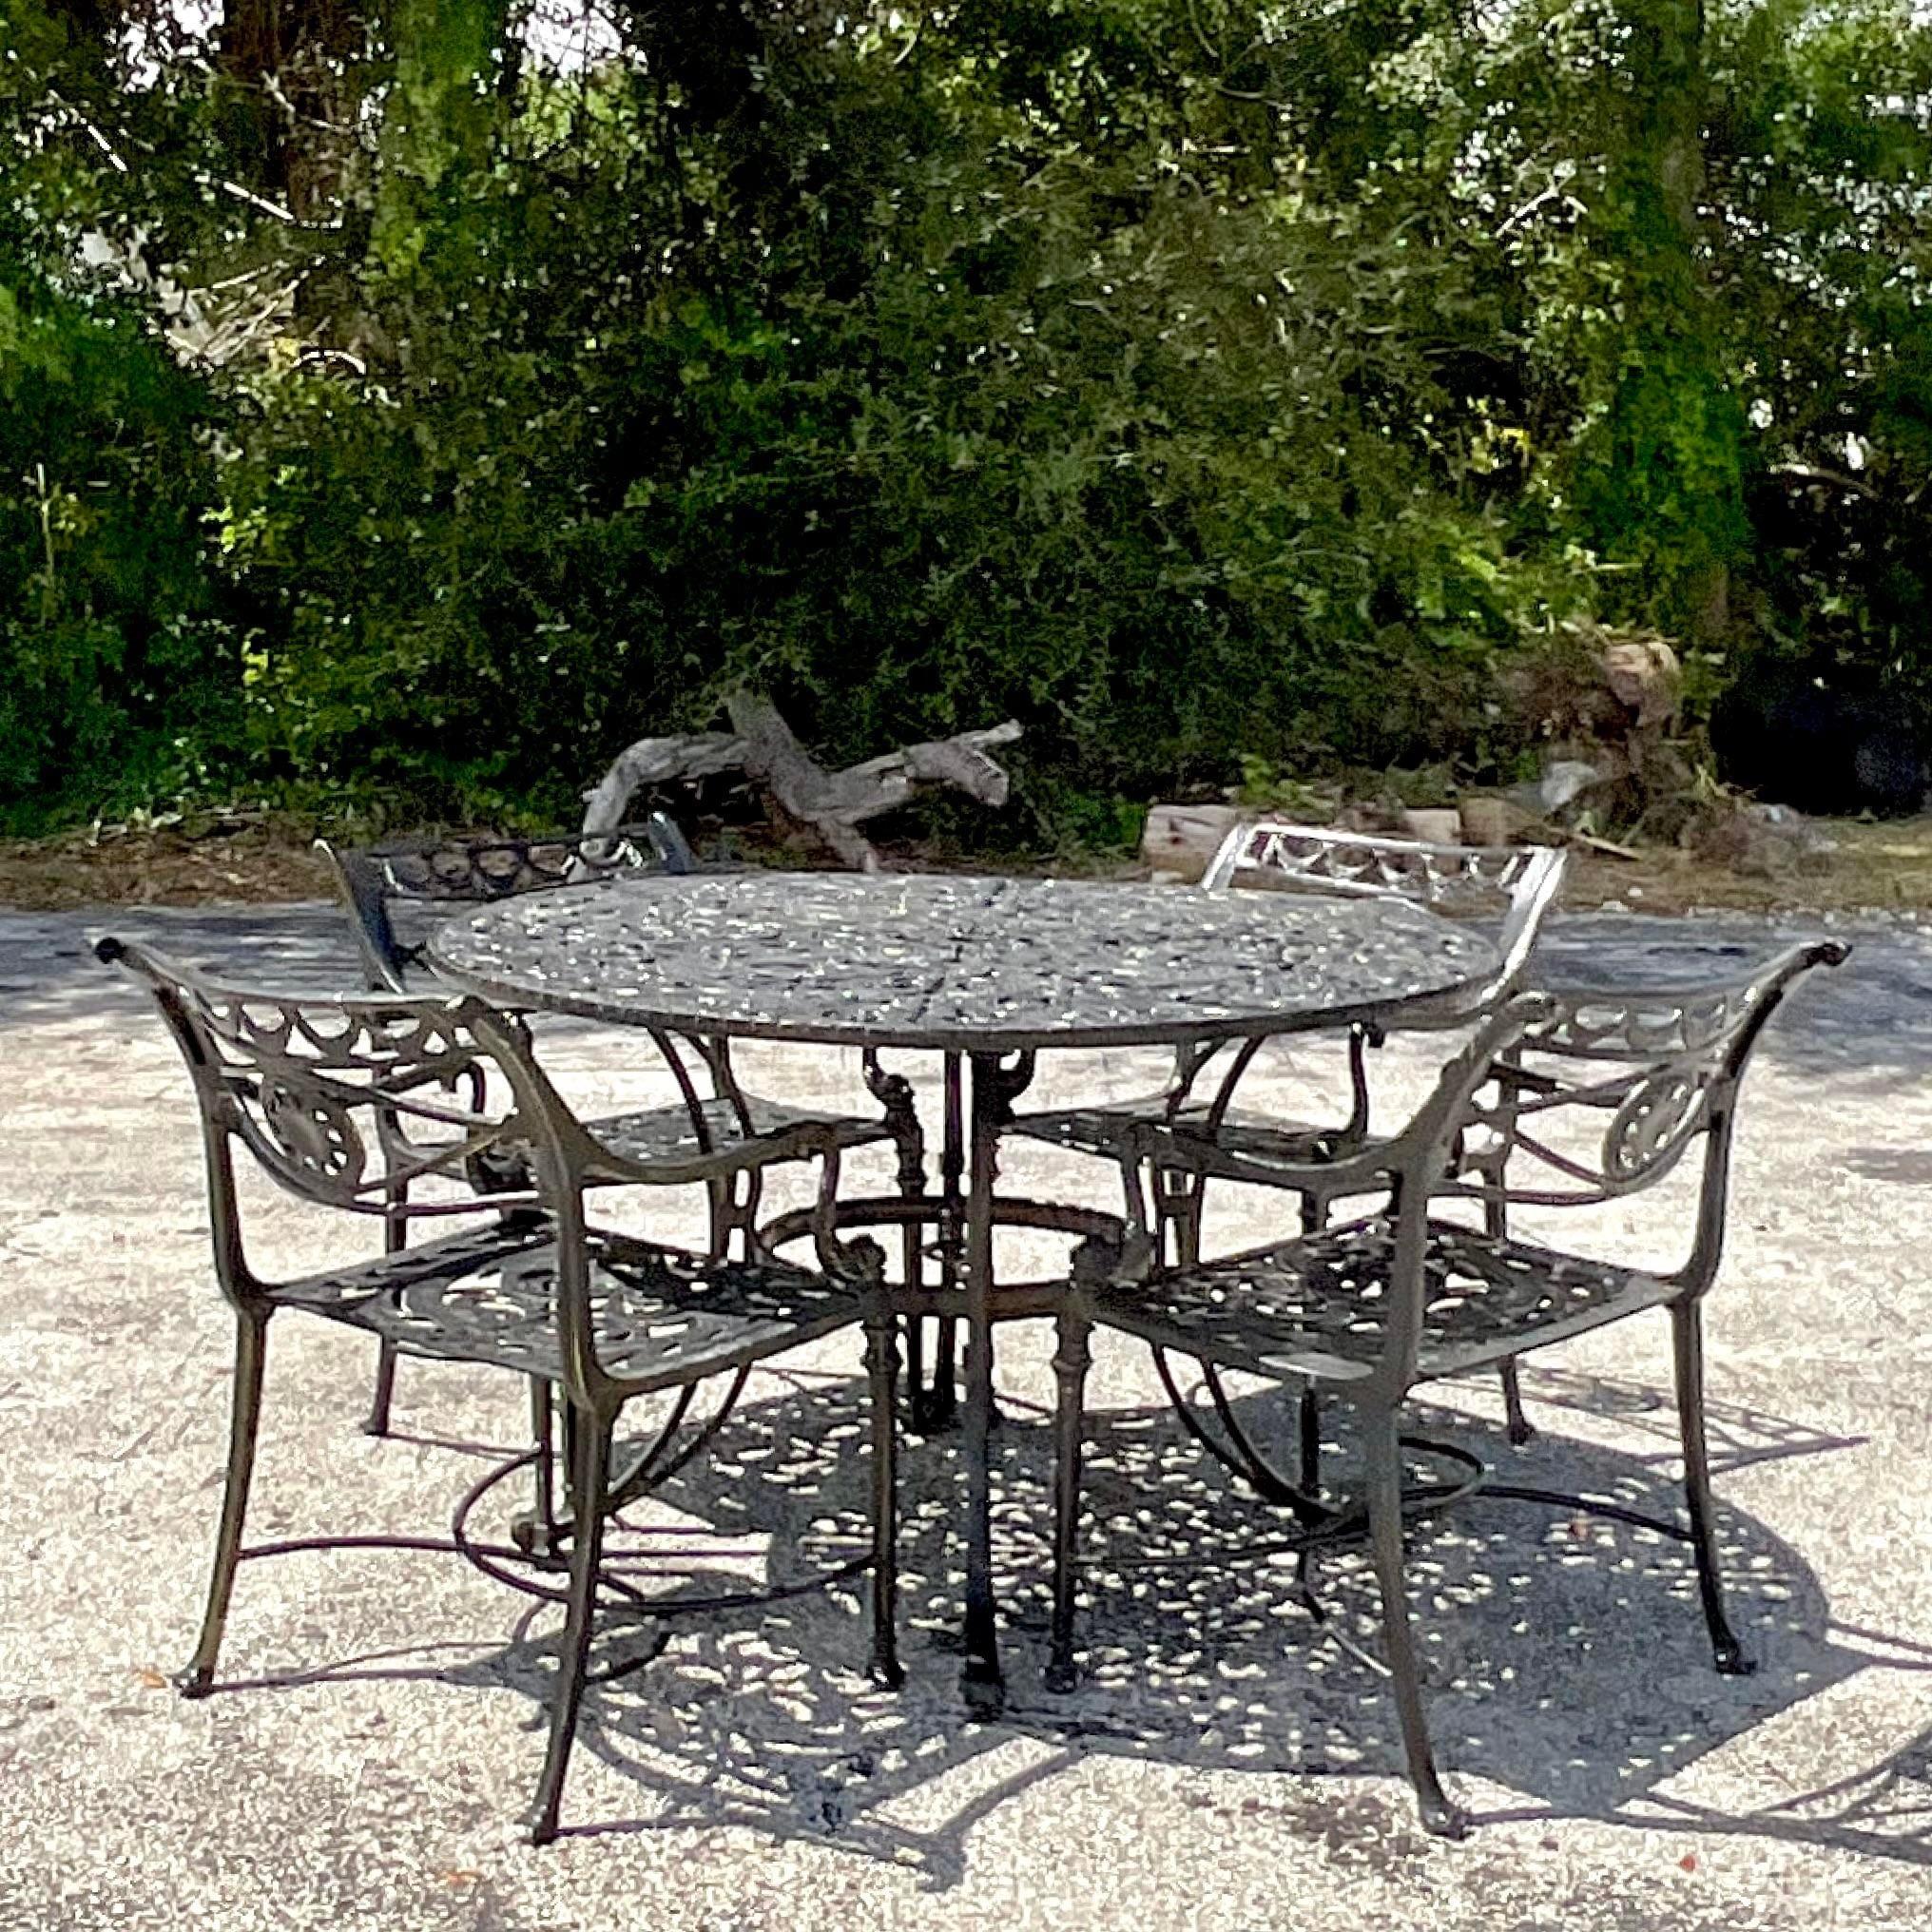 A fabulous vintage Coastal outdoor dining table. A chic cast aluminum in a gloss black finish. Coordinating Dolphin chairs and another table also available on my page. Acquired from a Palm Beach estate.